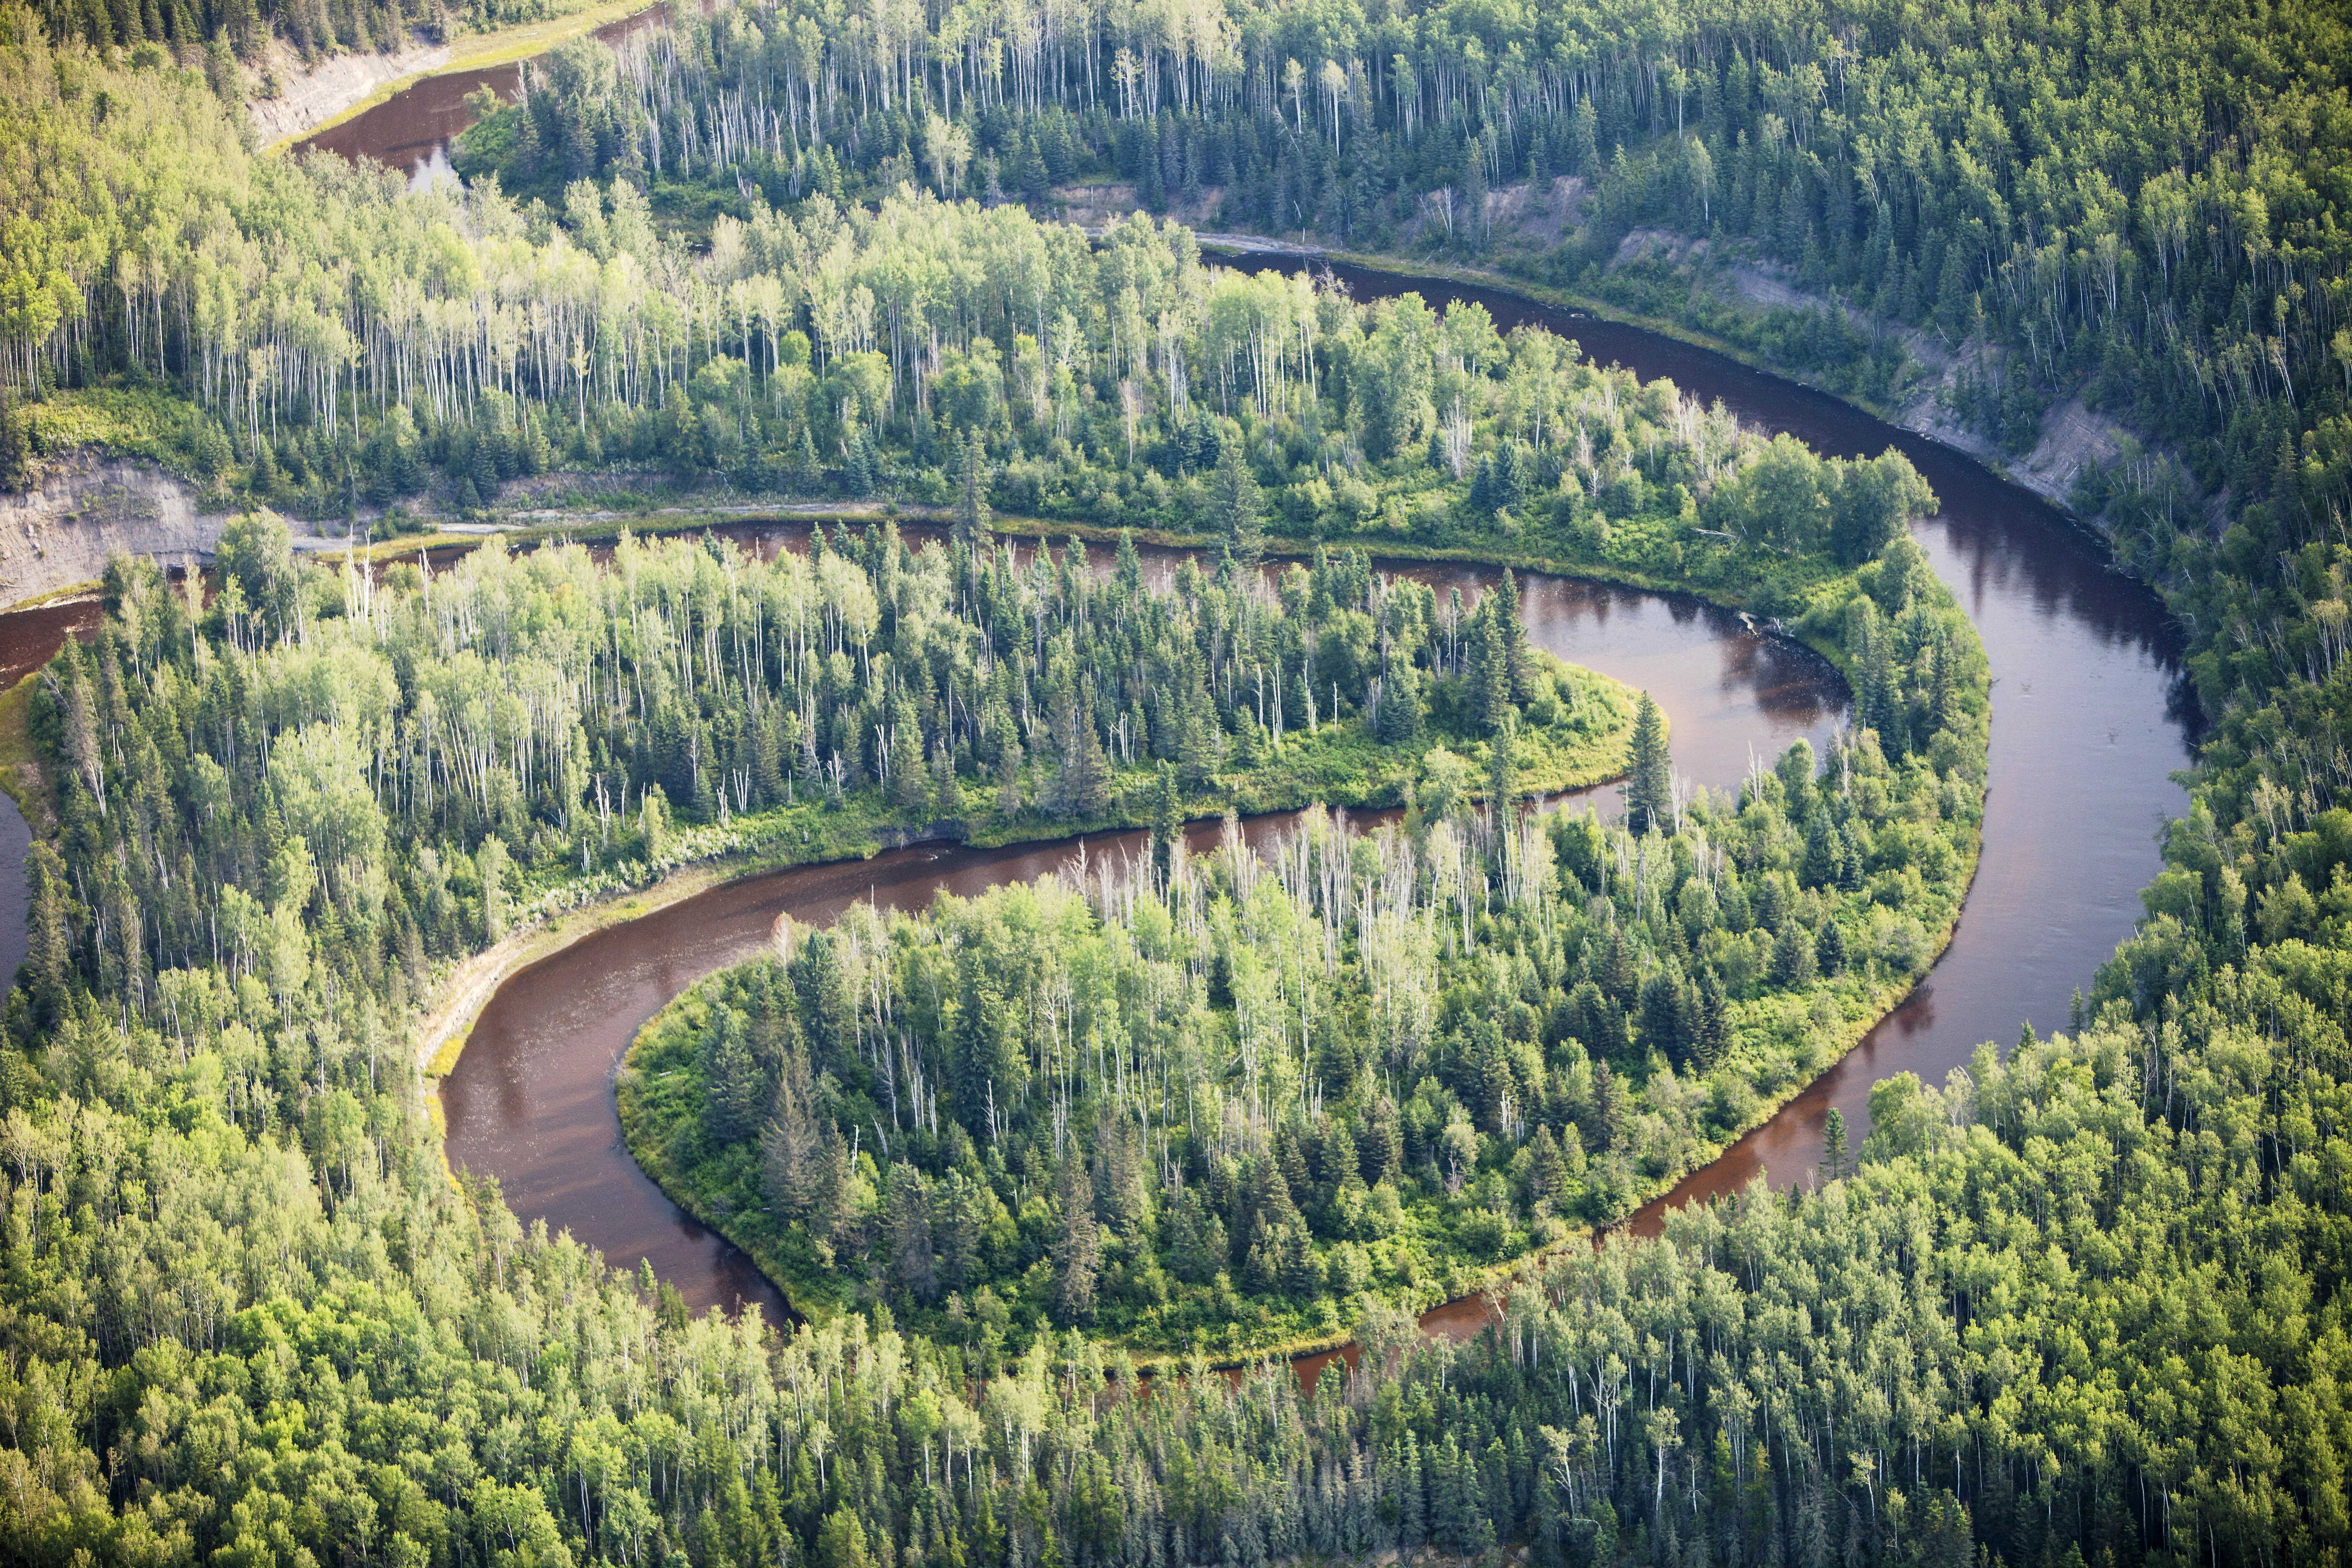 A river winds through boreal forest in Northern Alberta, Canada near Fort McMurray 